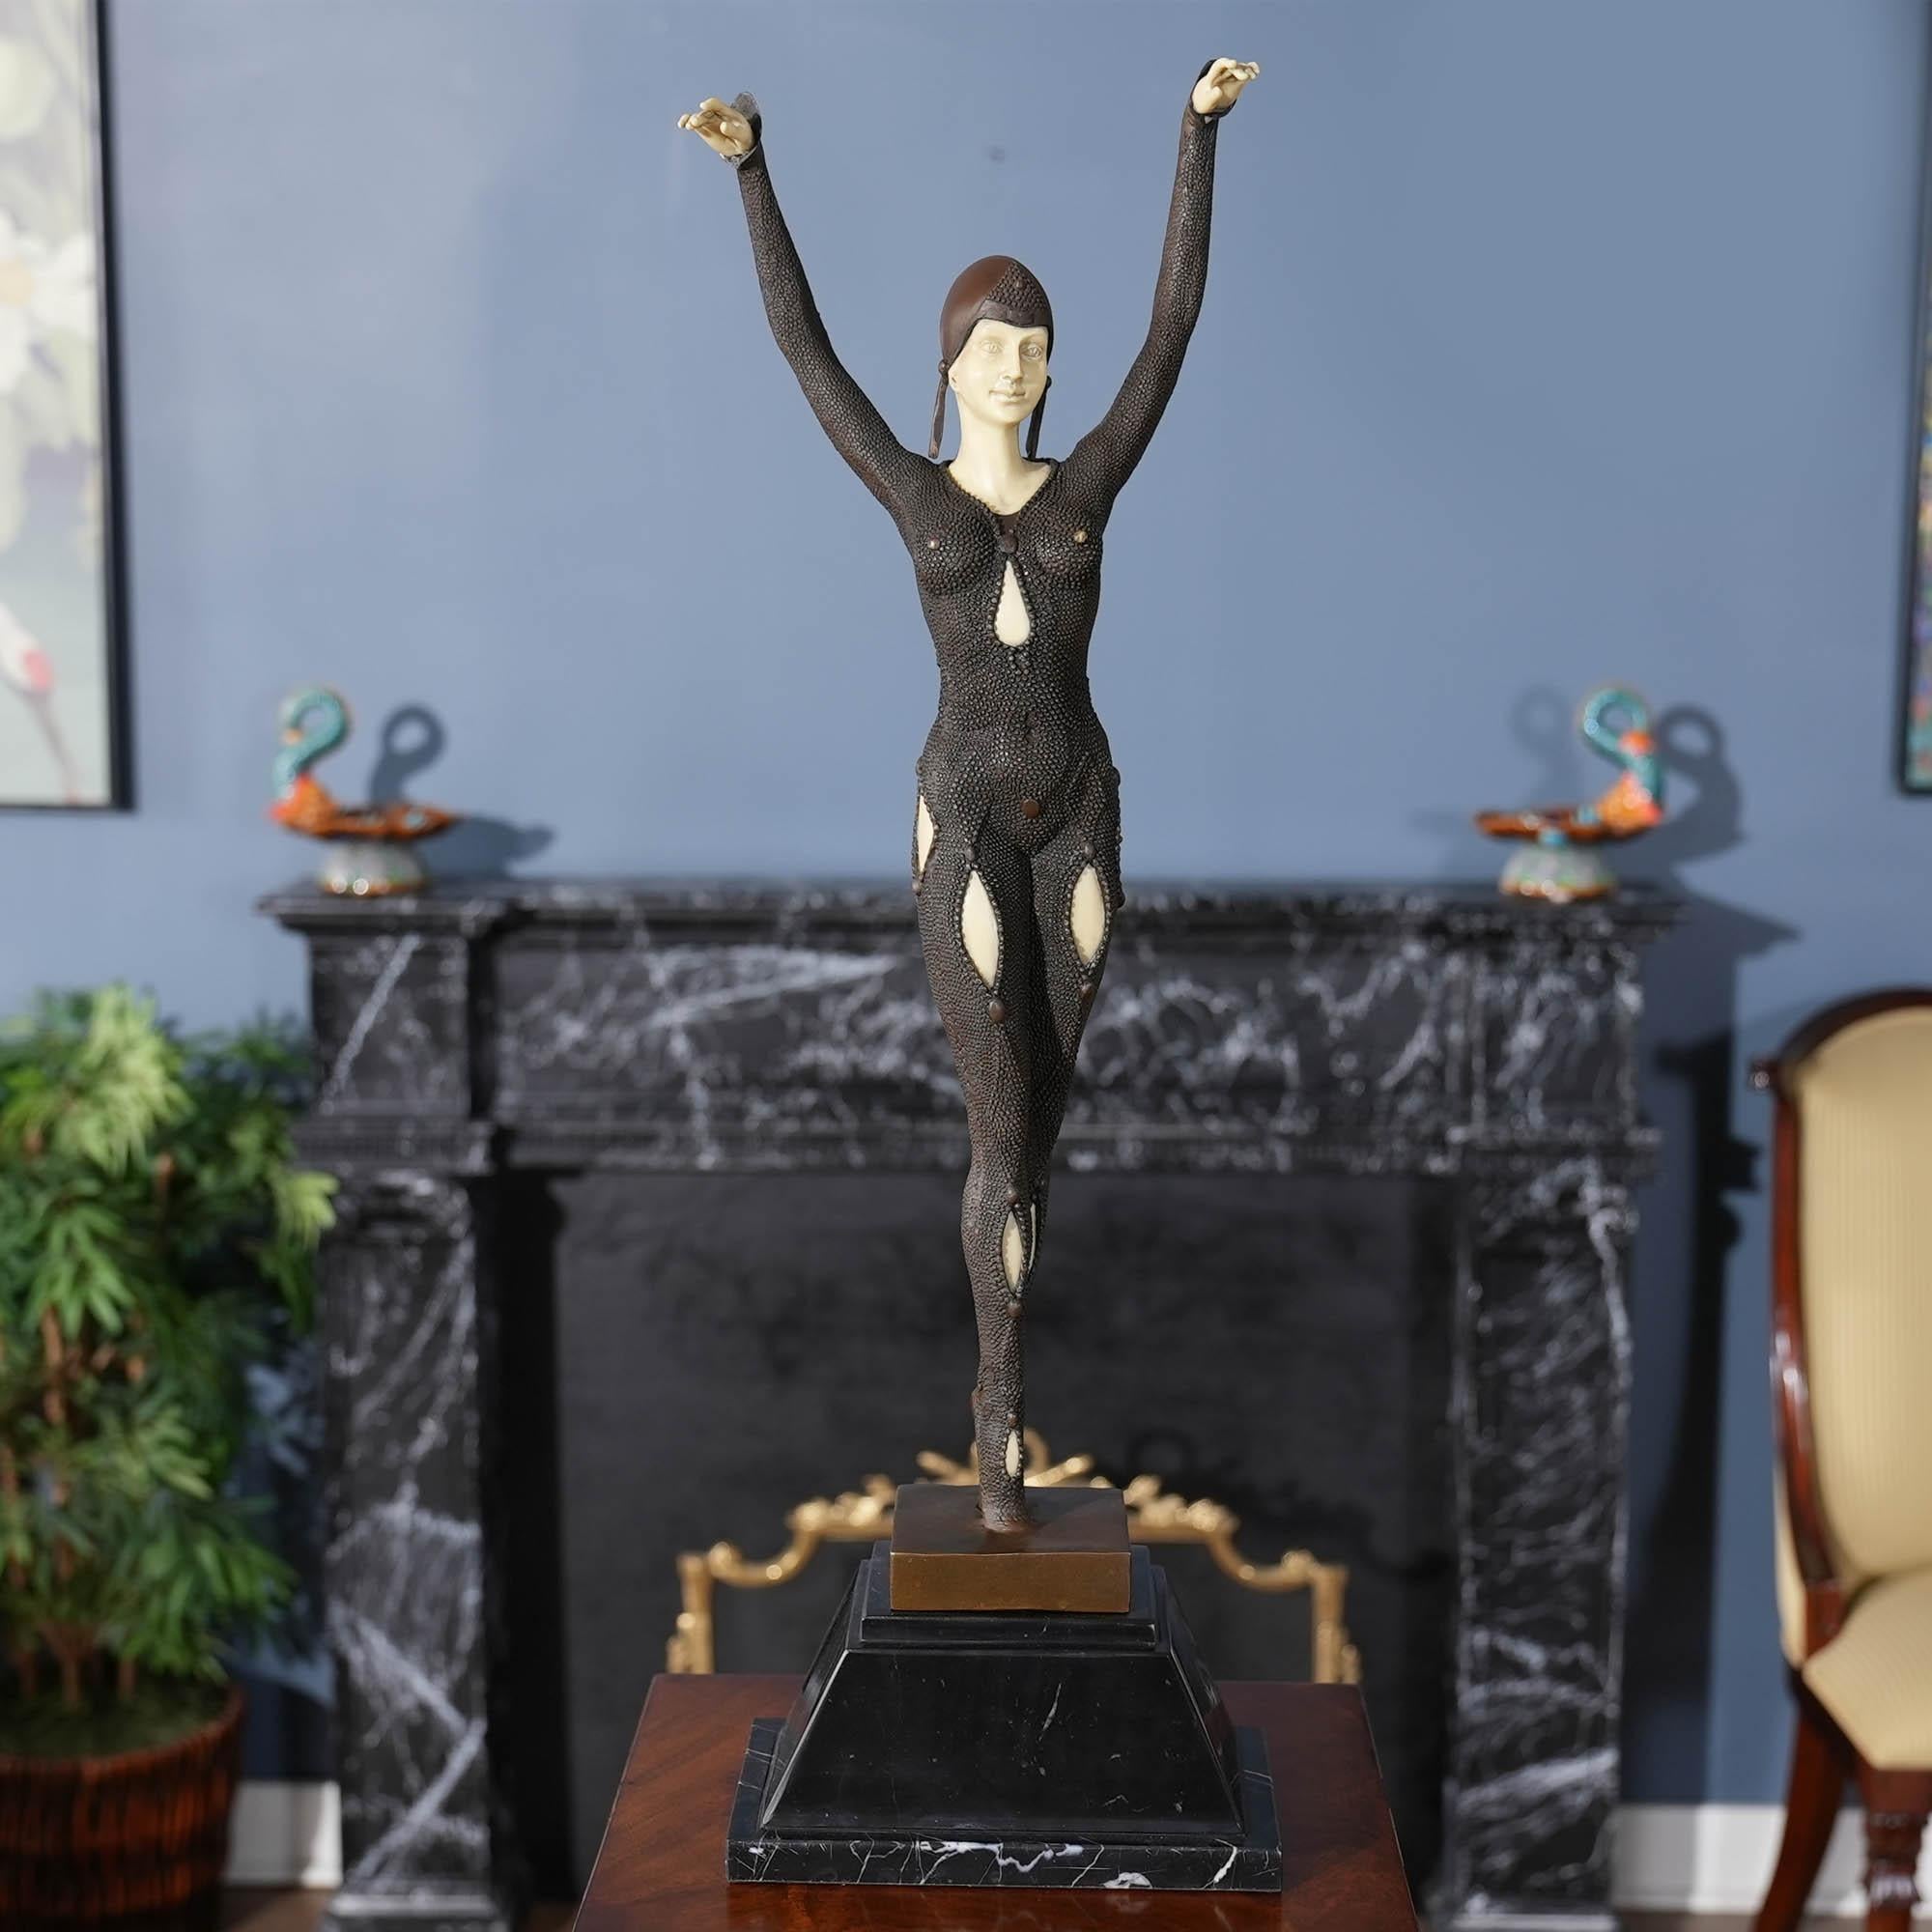 Graceful even when standing still the Bronze Parisian Dancer on Marble Base is a striking addition to any setting. Using traditional lost wax casting methods the Bronze Parisian Dancer statue has hand chaised details added to give a high level of